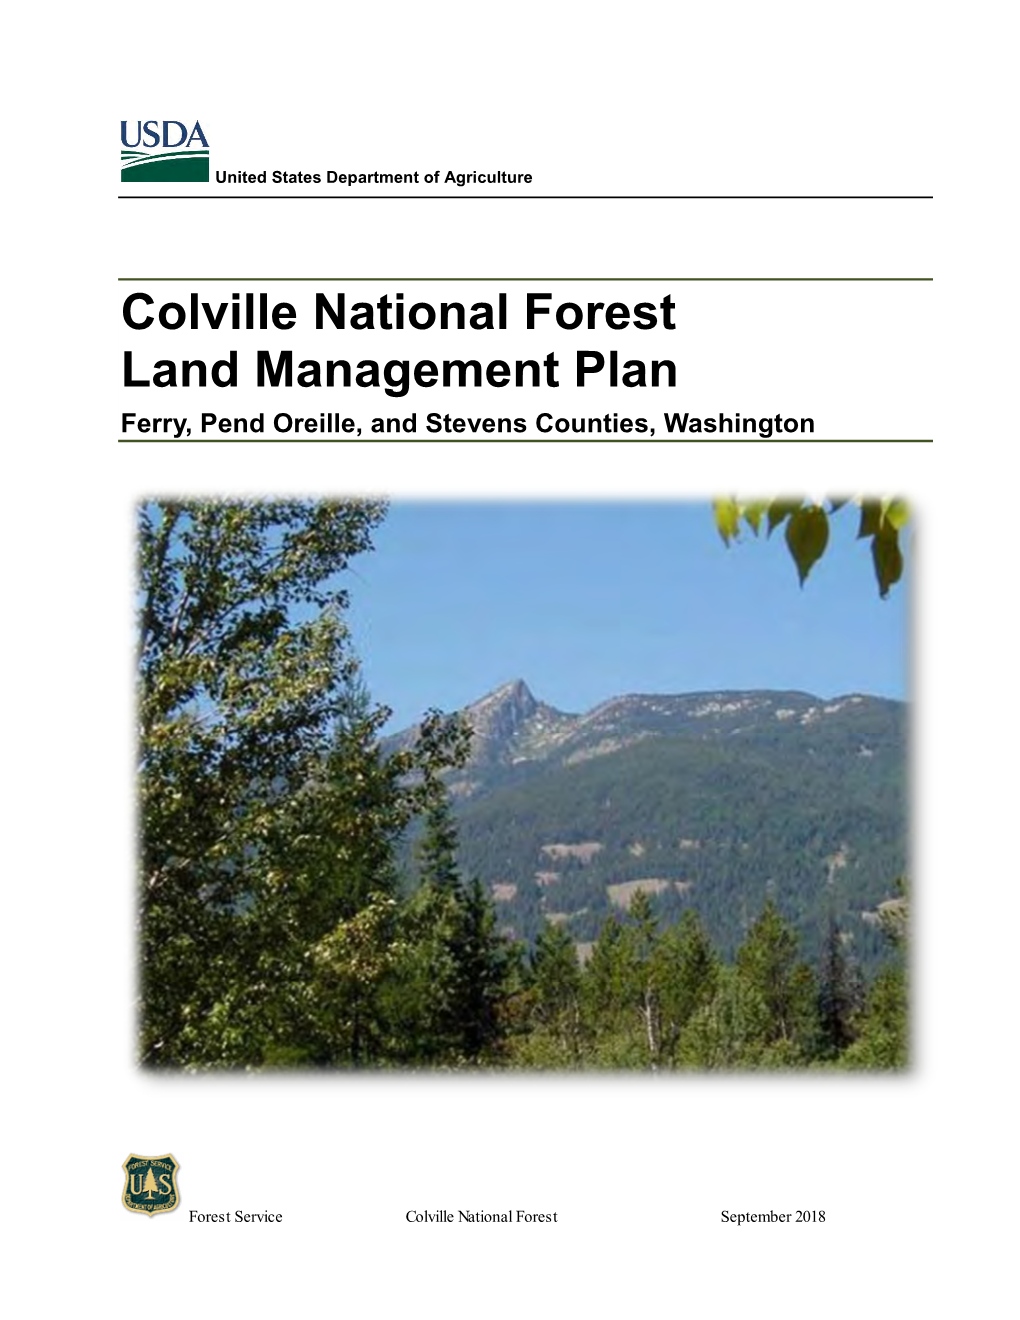 Colville National Forest Land Management Plan Ferry, Pend Oreille, and Stevens Counties, Washington